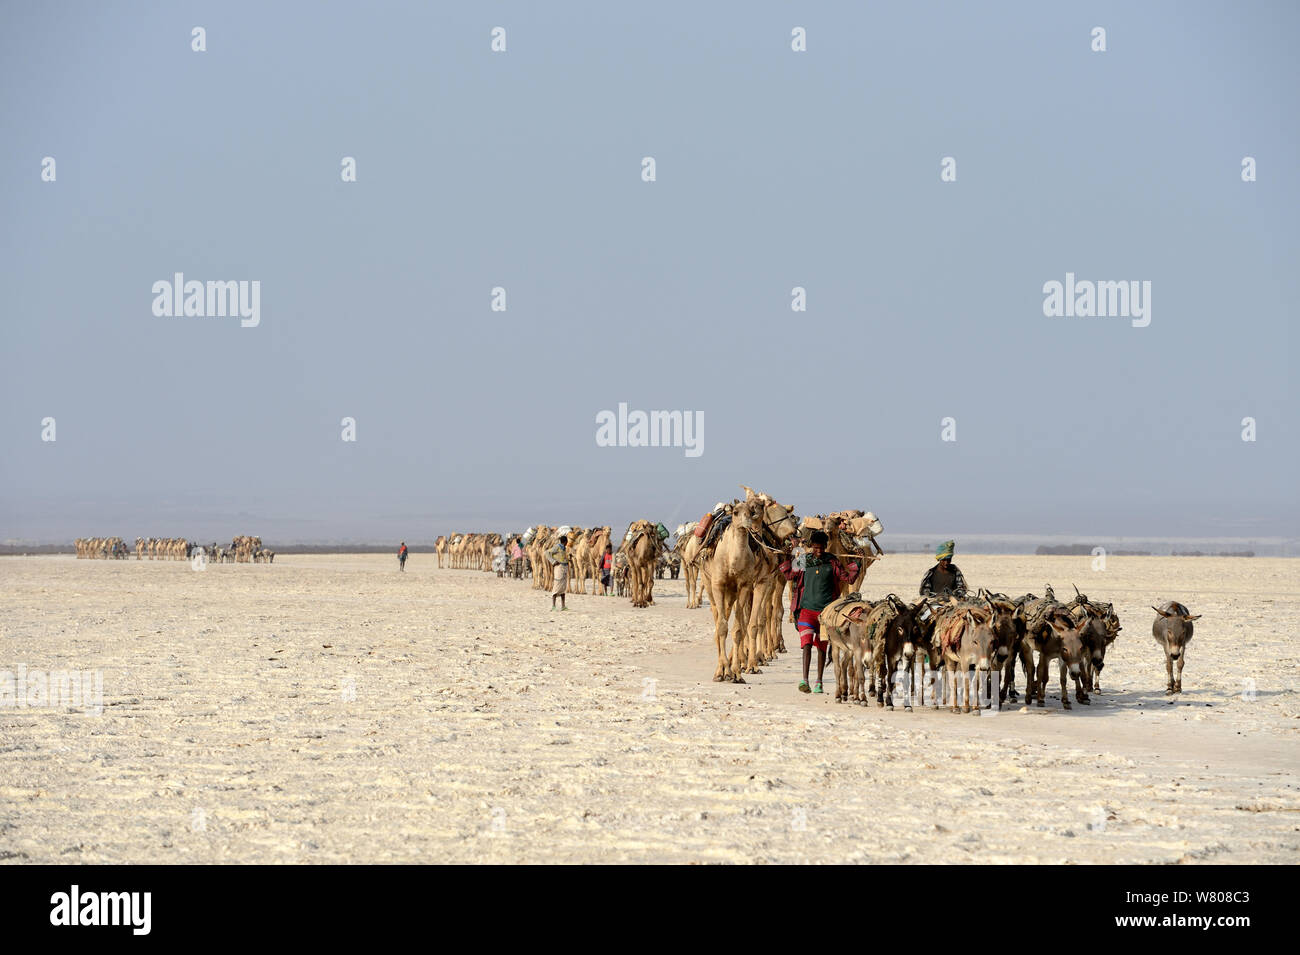 Salt caravans made up of hundreds of Dromedary camels (Camelus dromedarius), donkeys and their pullers transporting salt slabs cut from the salt lake Assale to the Mekele market, Danakil depression, Afar region, Ethiopia, March 2015. Stock Photo